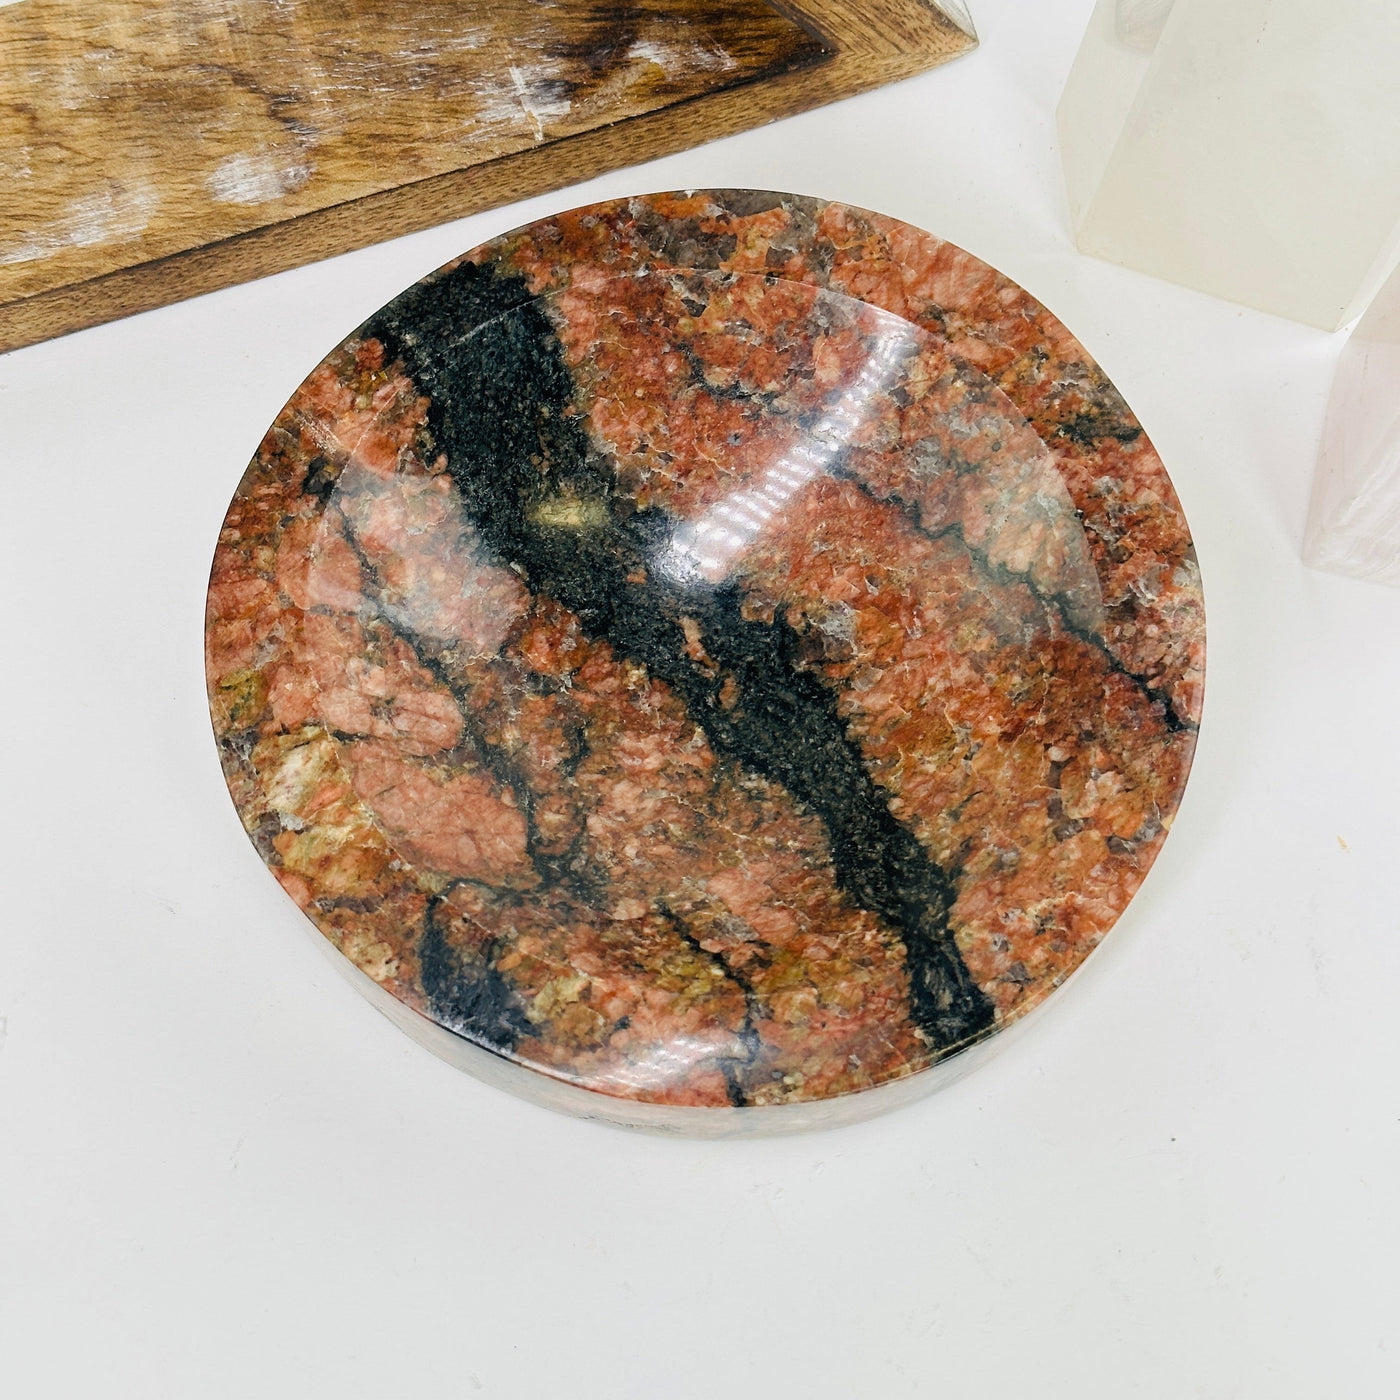 feldspar and tourmaline bowl with decorations in the background